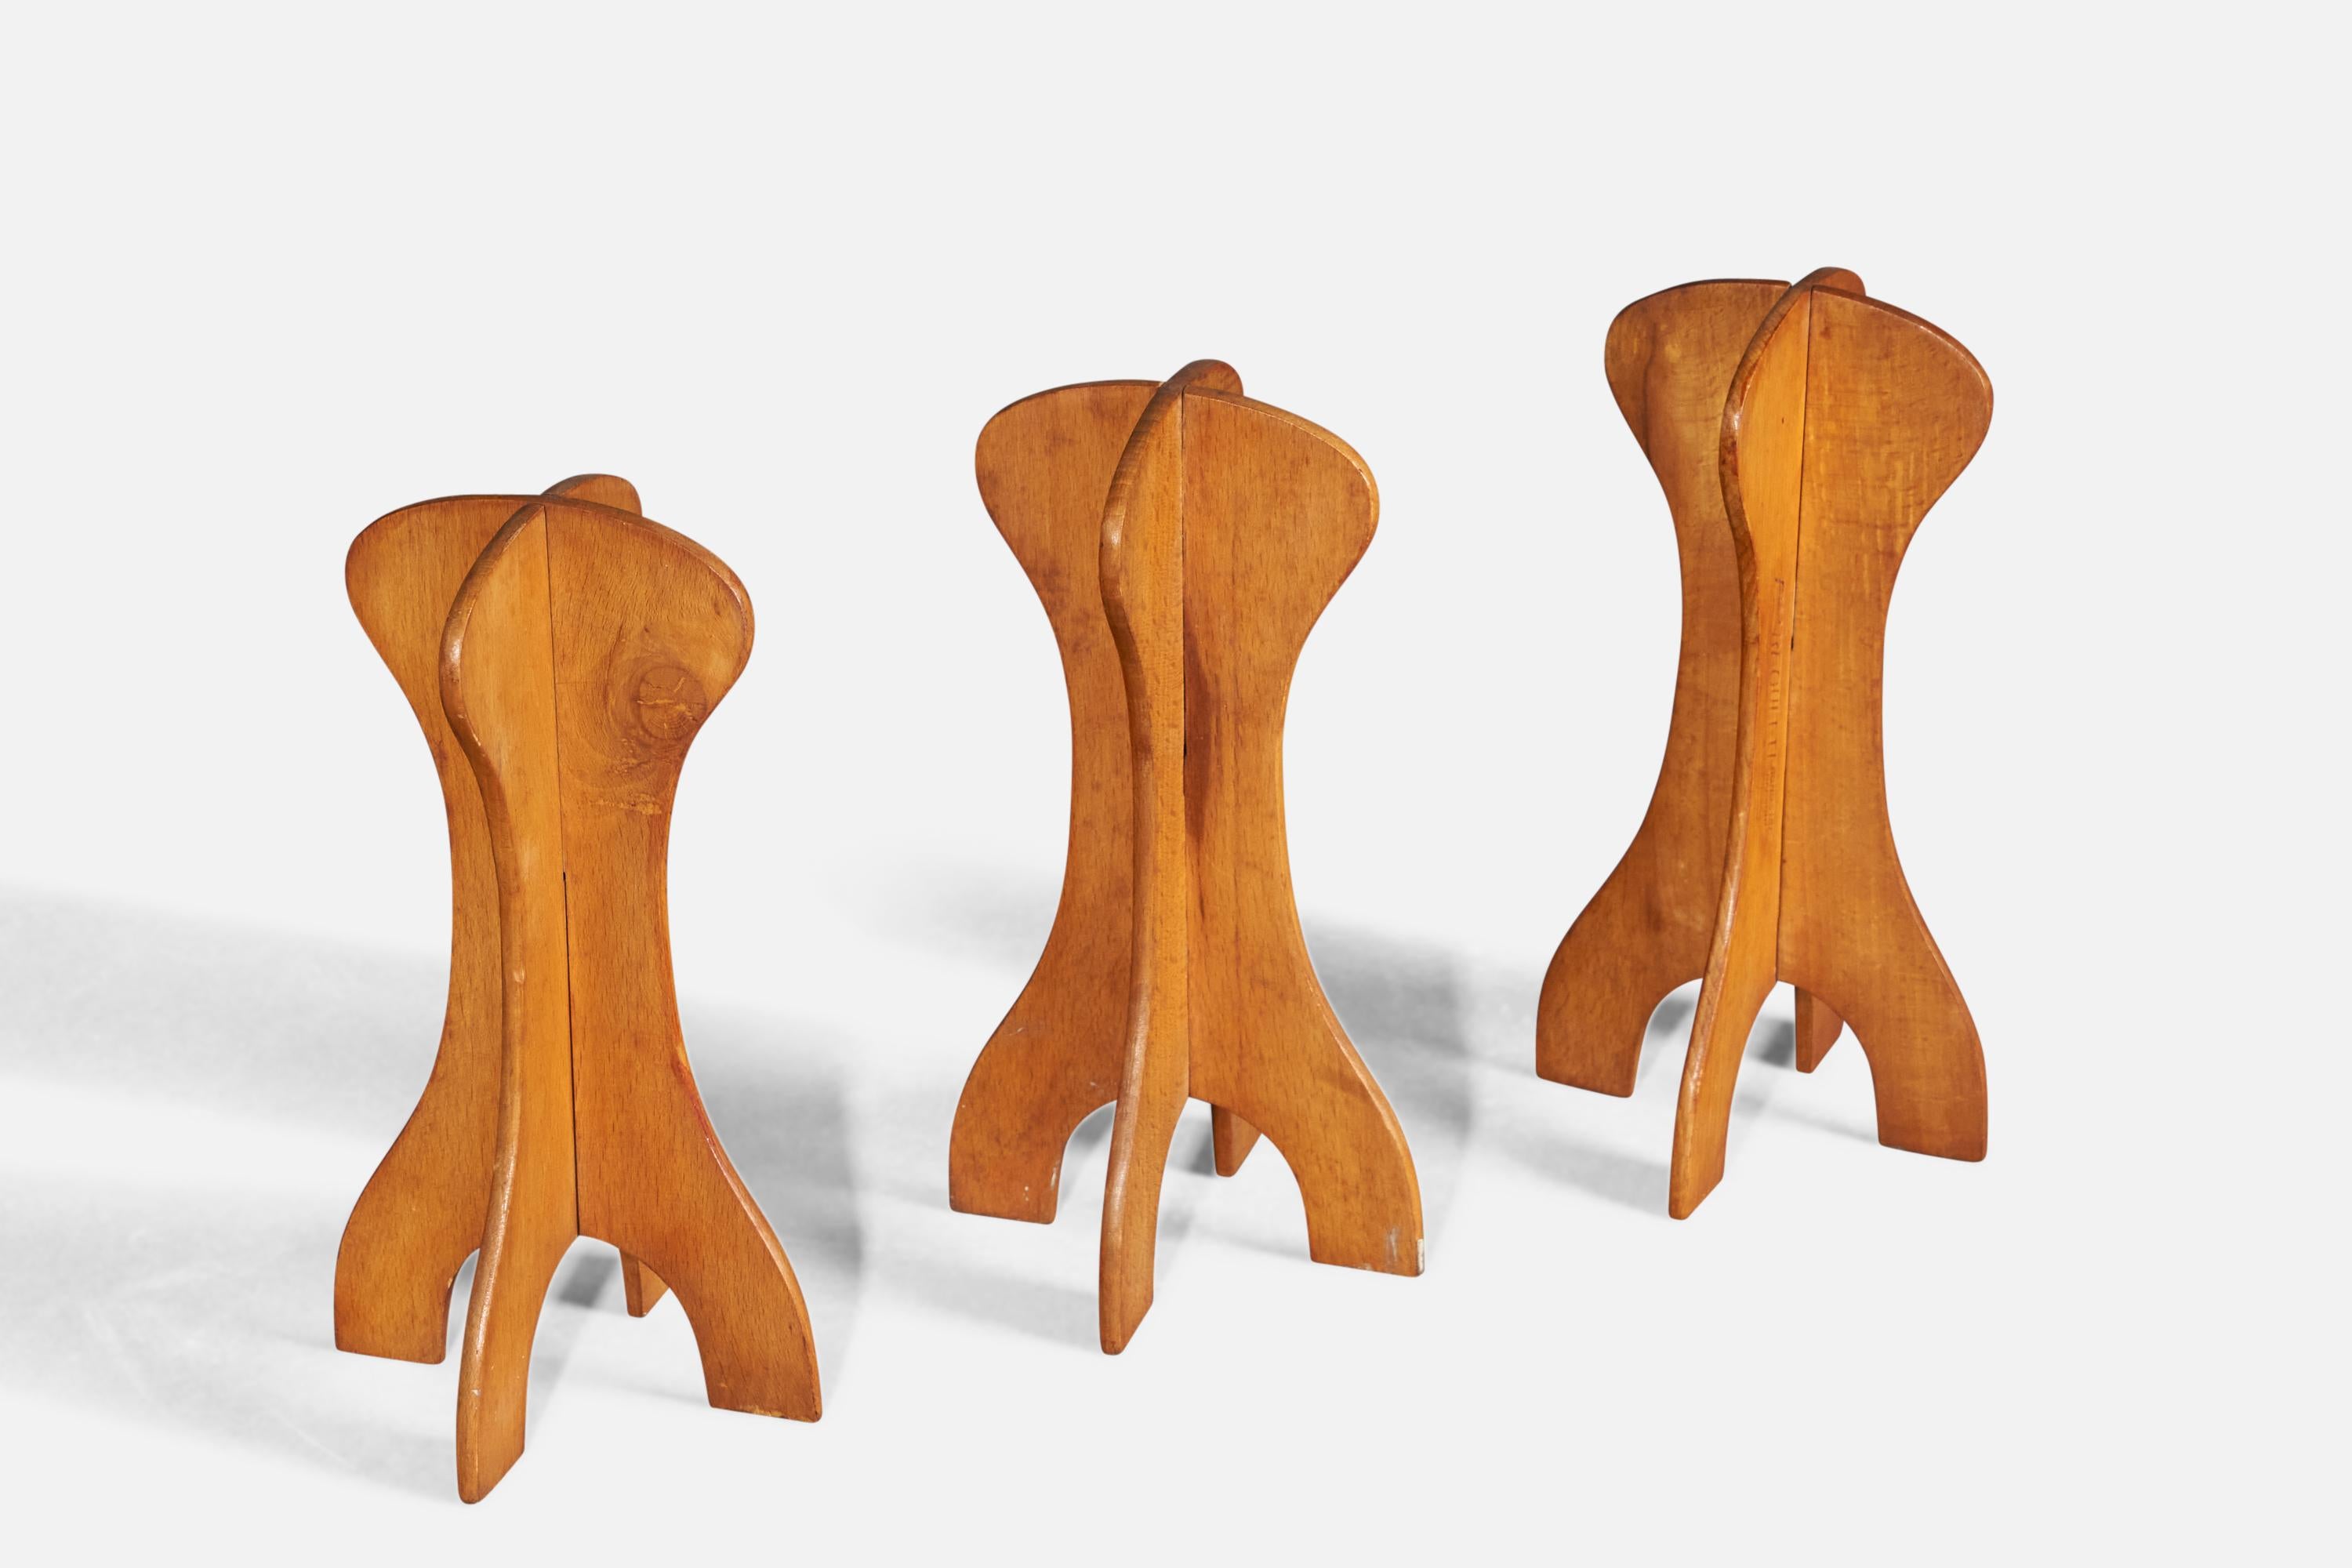 Mid-20th Century Italian Designer, Hat Stands, Wood, Italy, 1940s For Sale